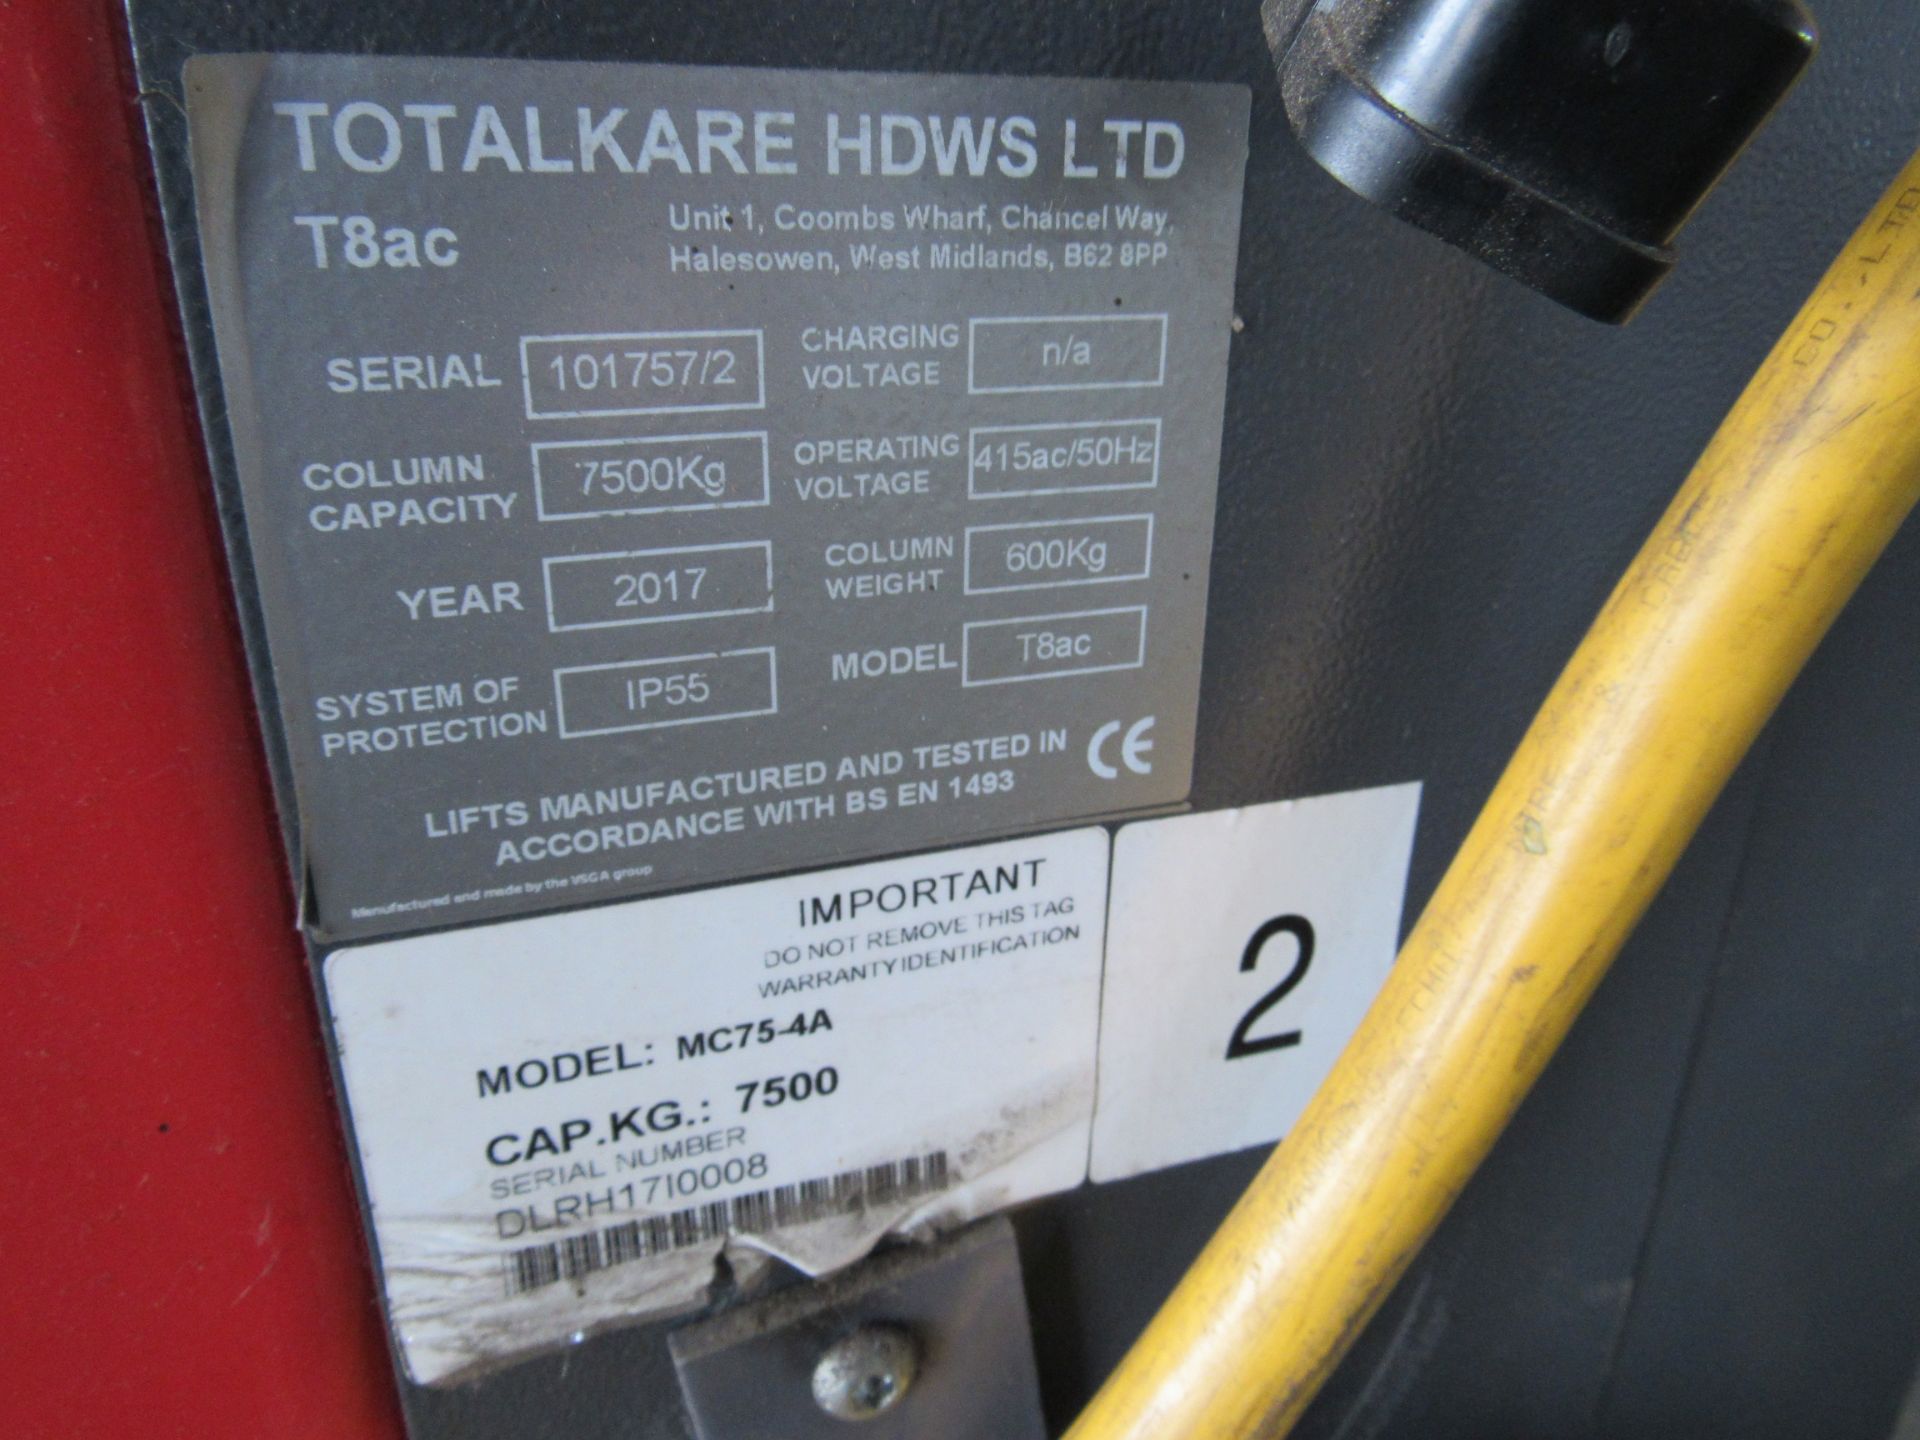 4 Totalkare T8AC 7500Kg Mobile Column Vehicle Lift, Year 2017, Serial Numbers 101757/4, 101757/1, - Image 4 of 11